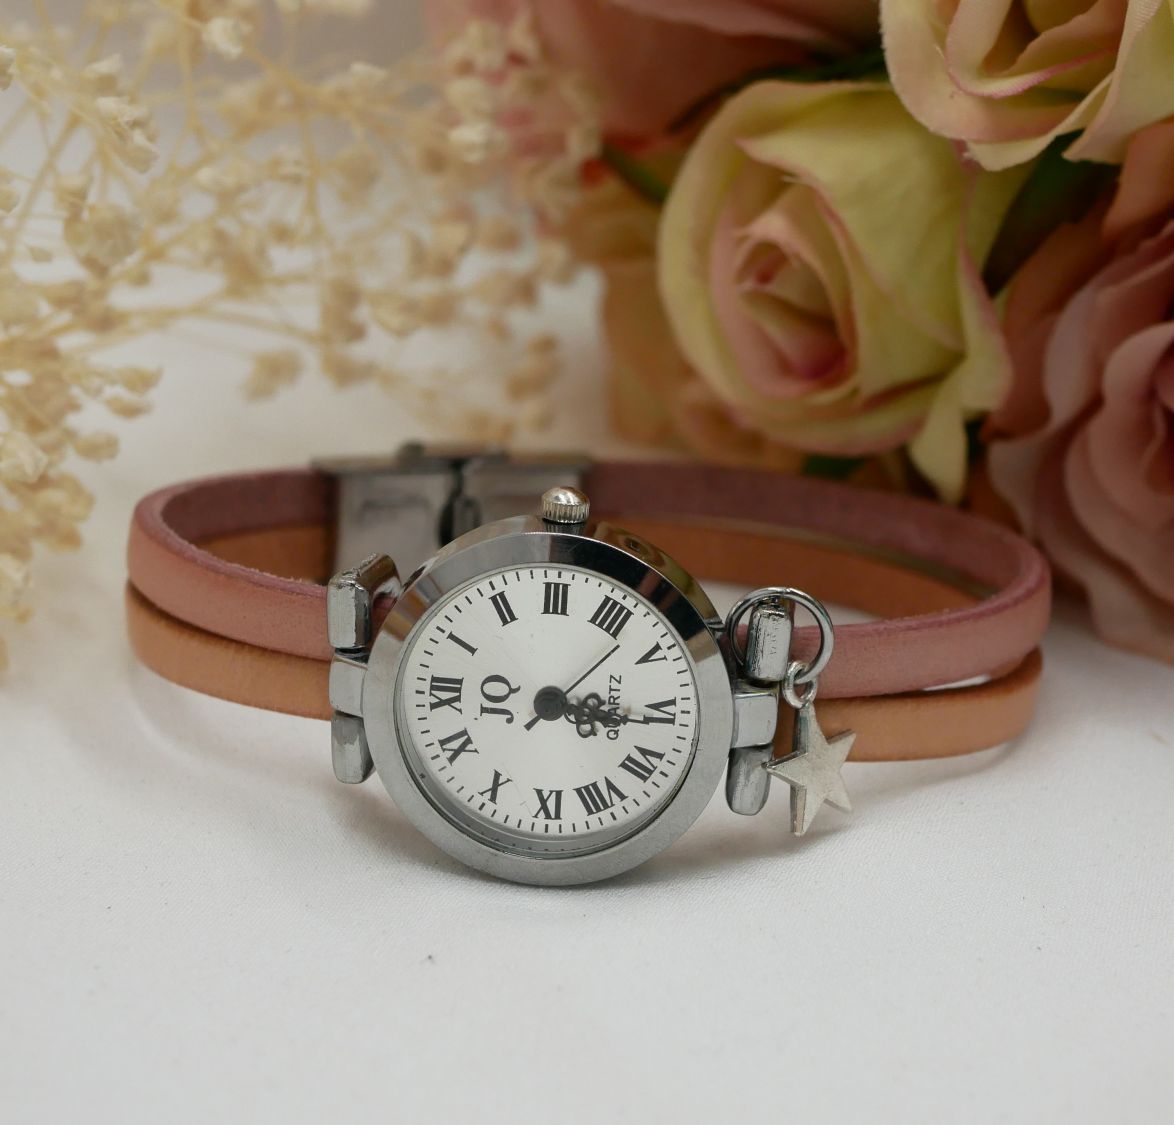 Silver-plated watch with duo leather strap in your choice of color and personalized engraving